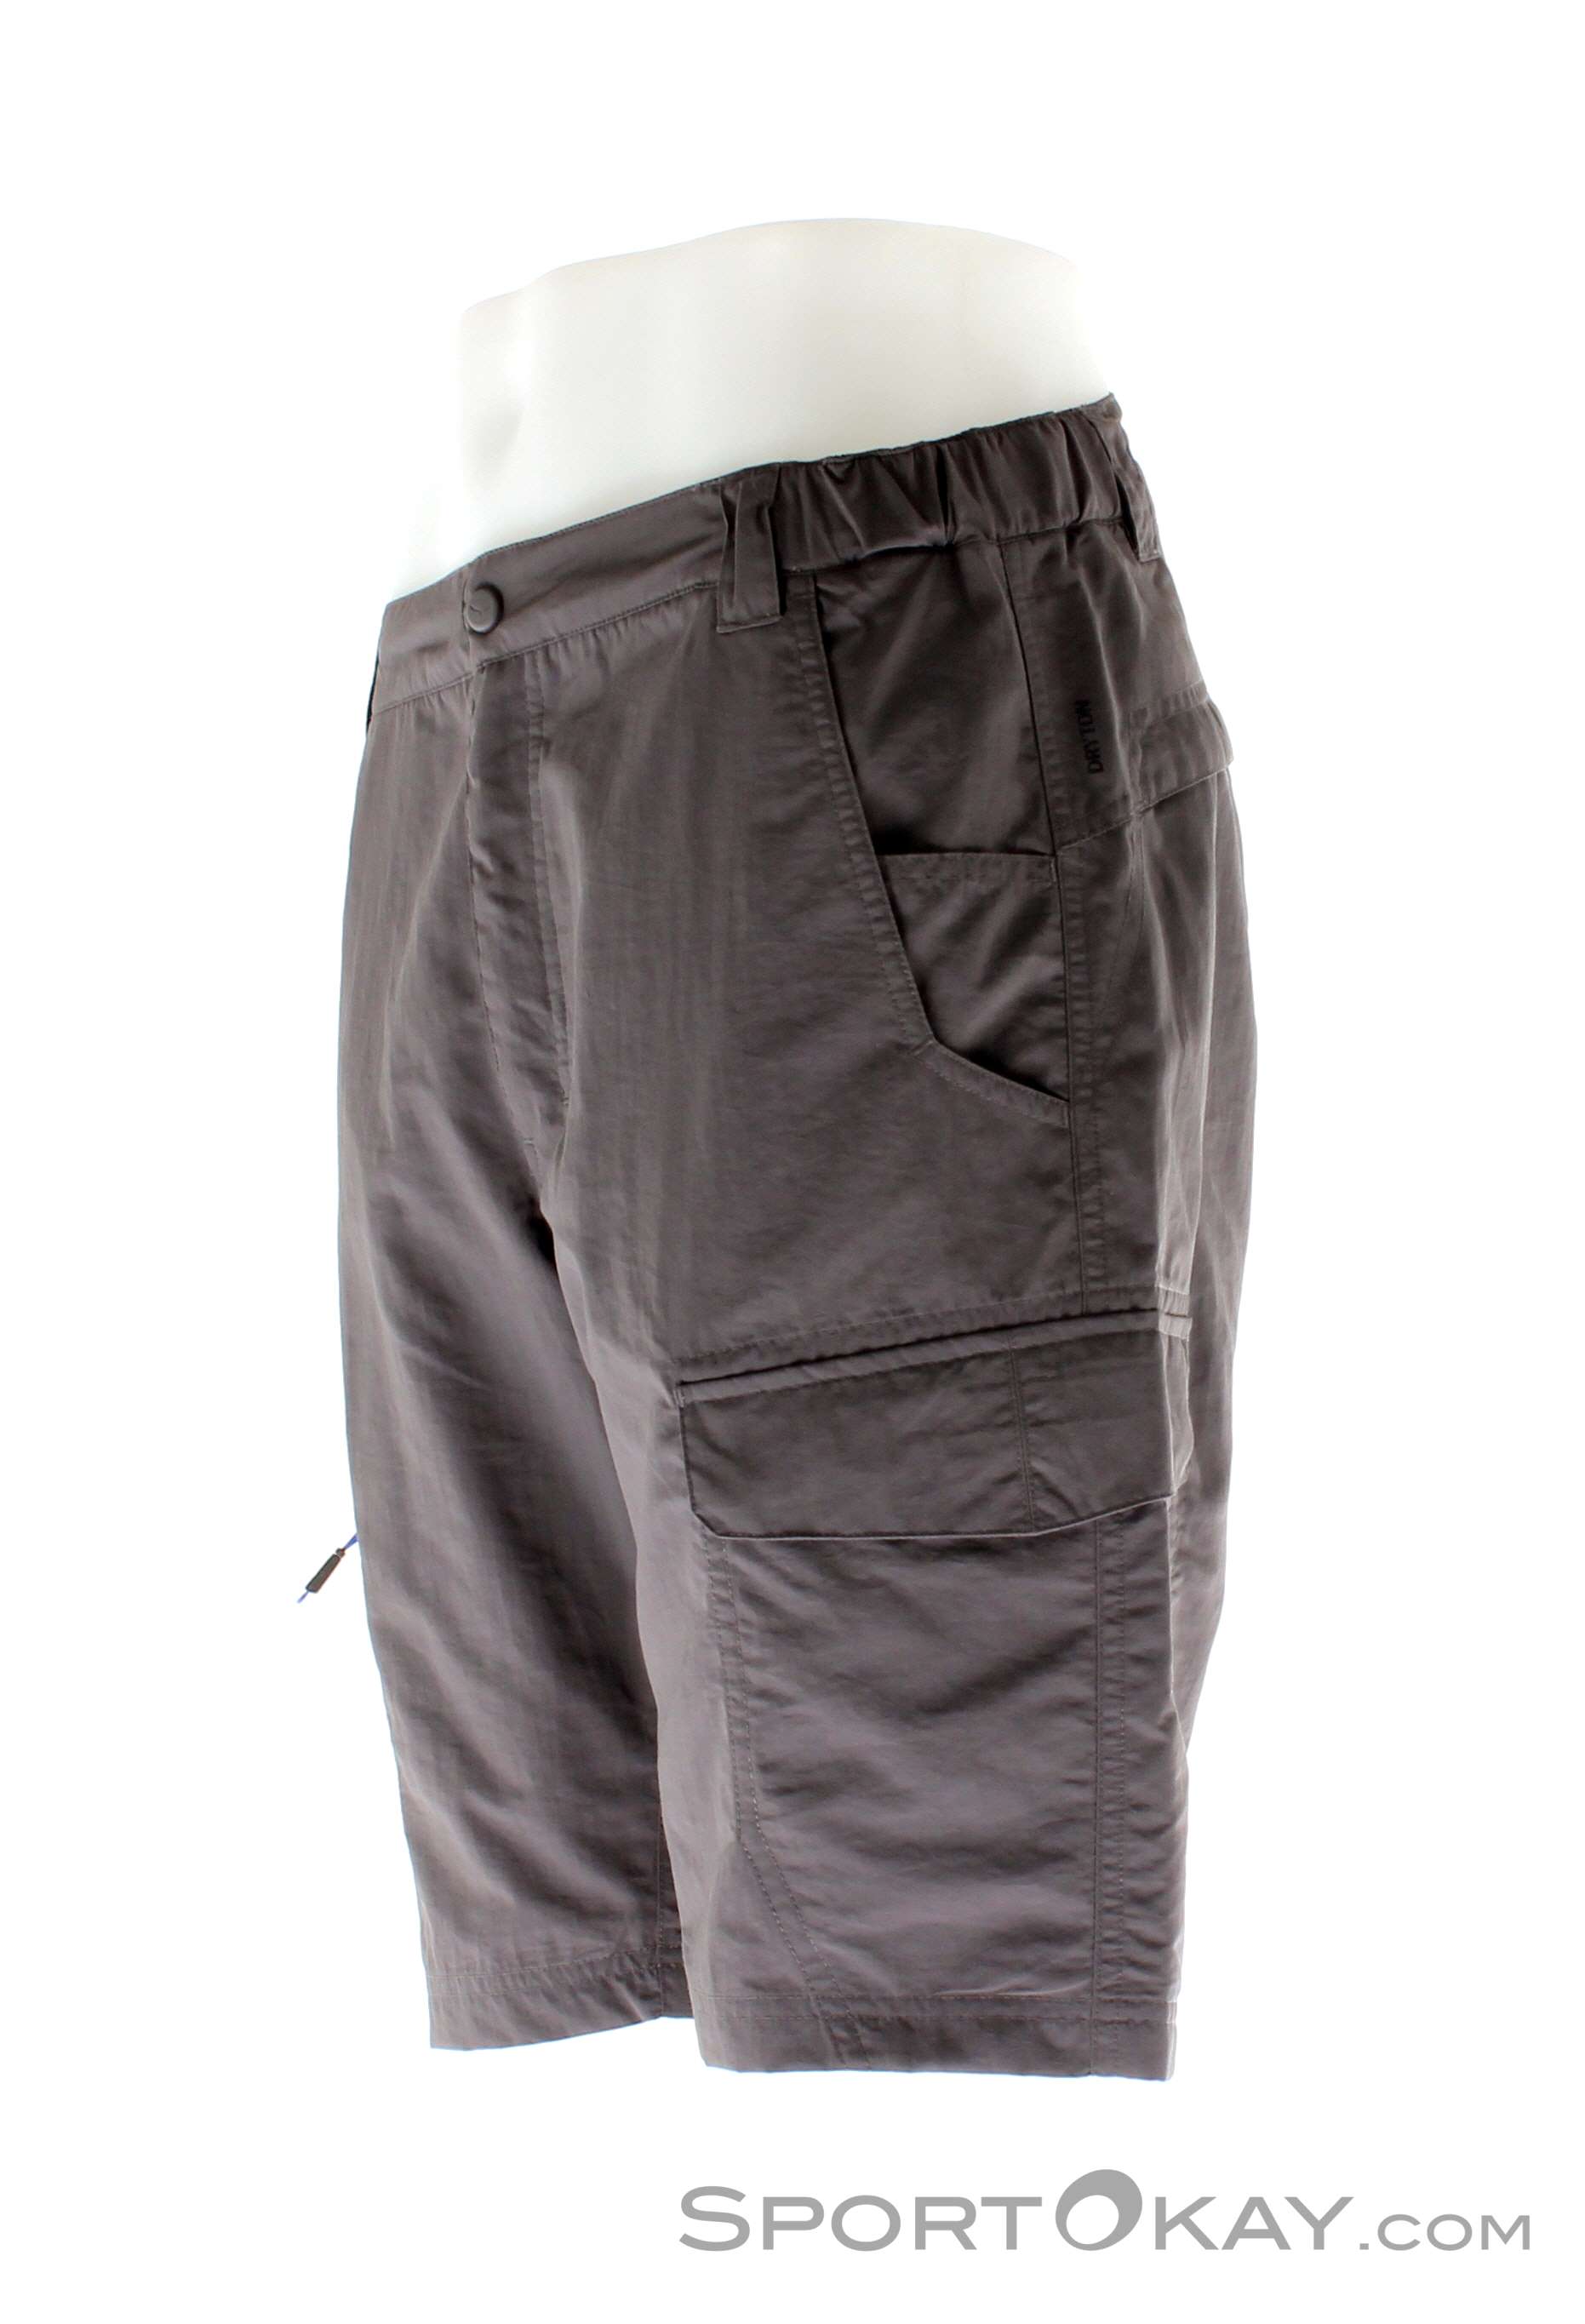 Salewa Fanes Seura 2 Dry Outdoor Pants - Pants - Clothing Outdoor - All